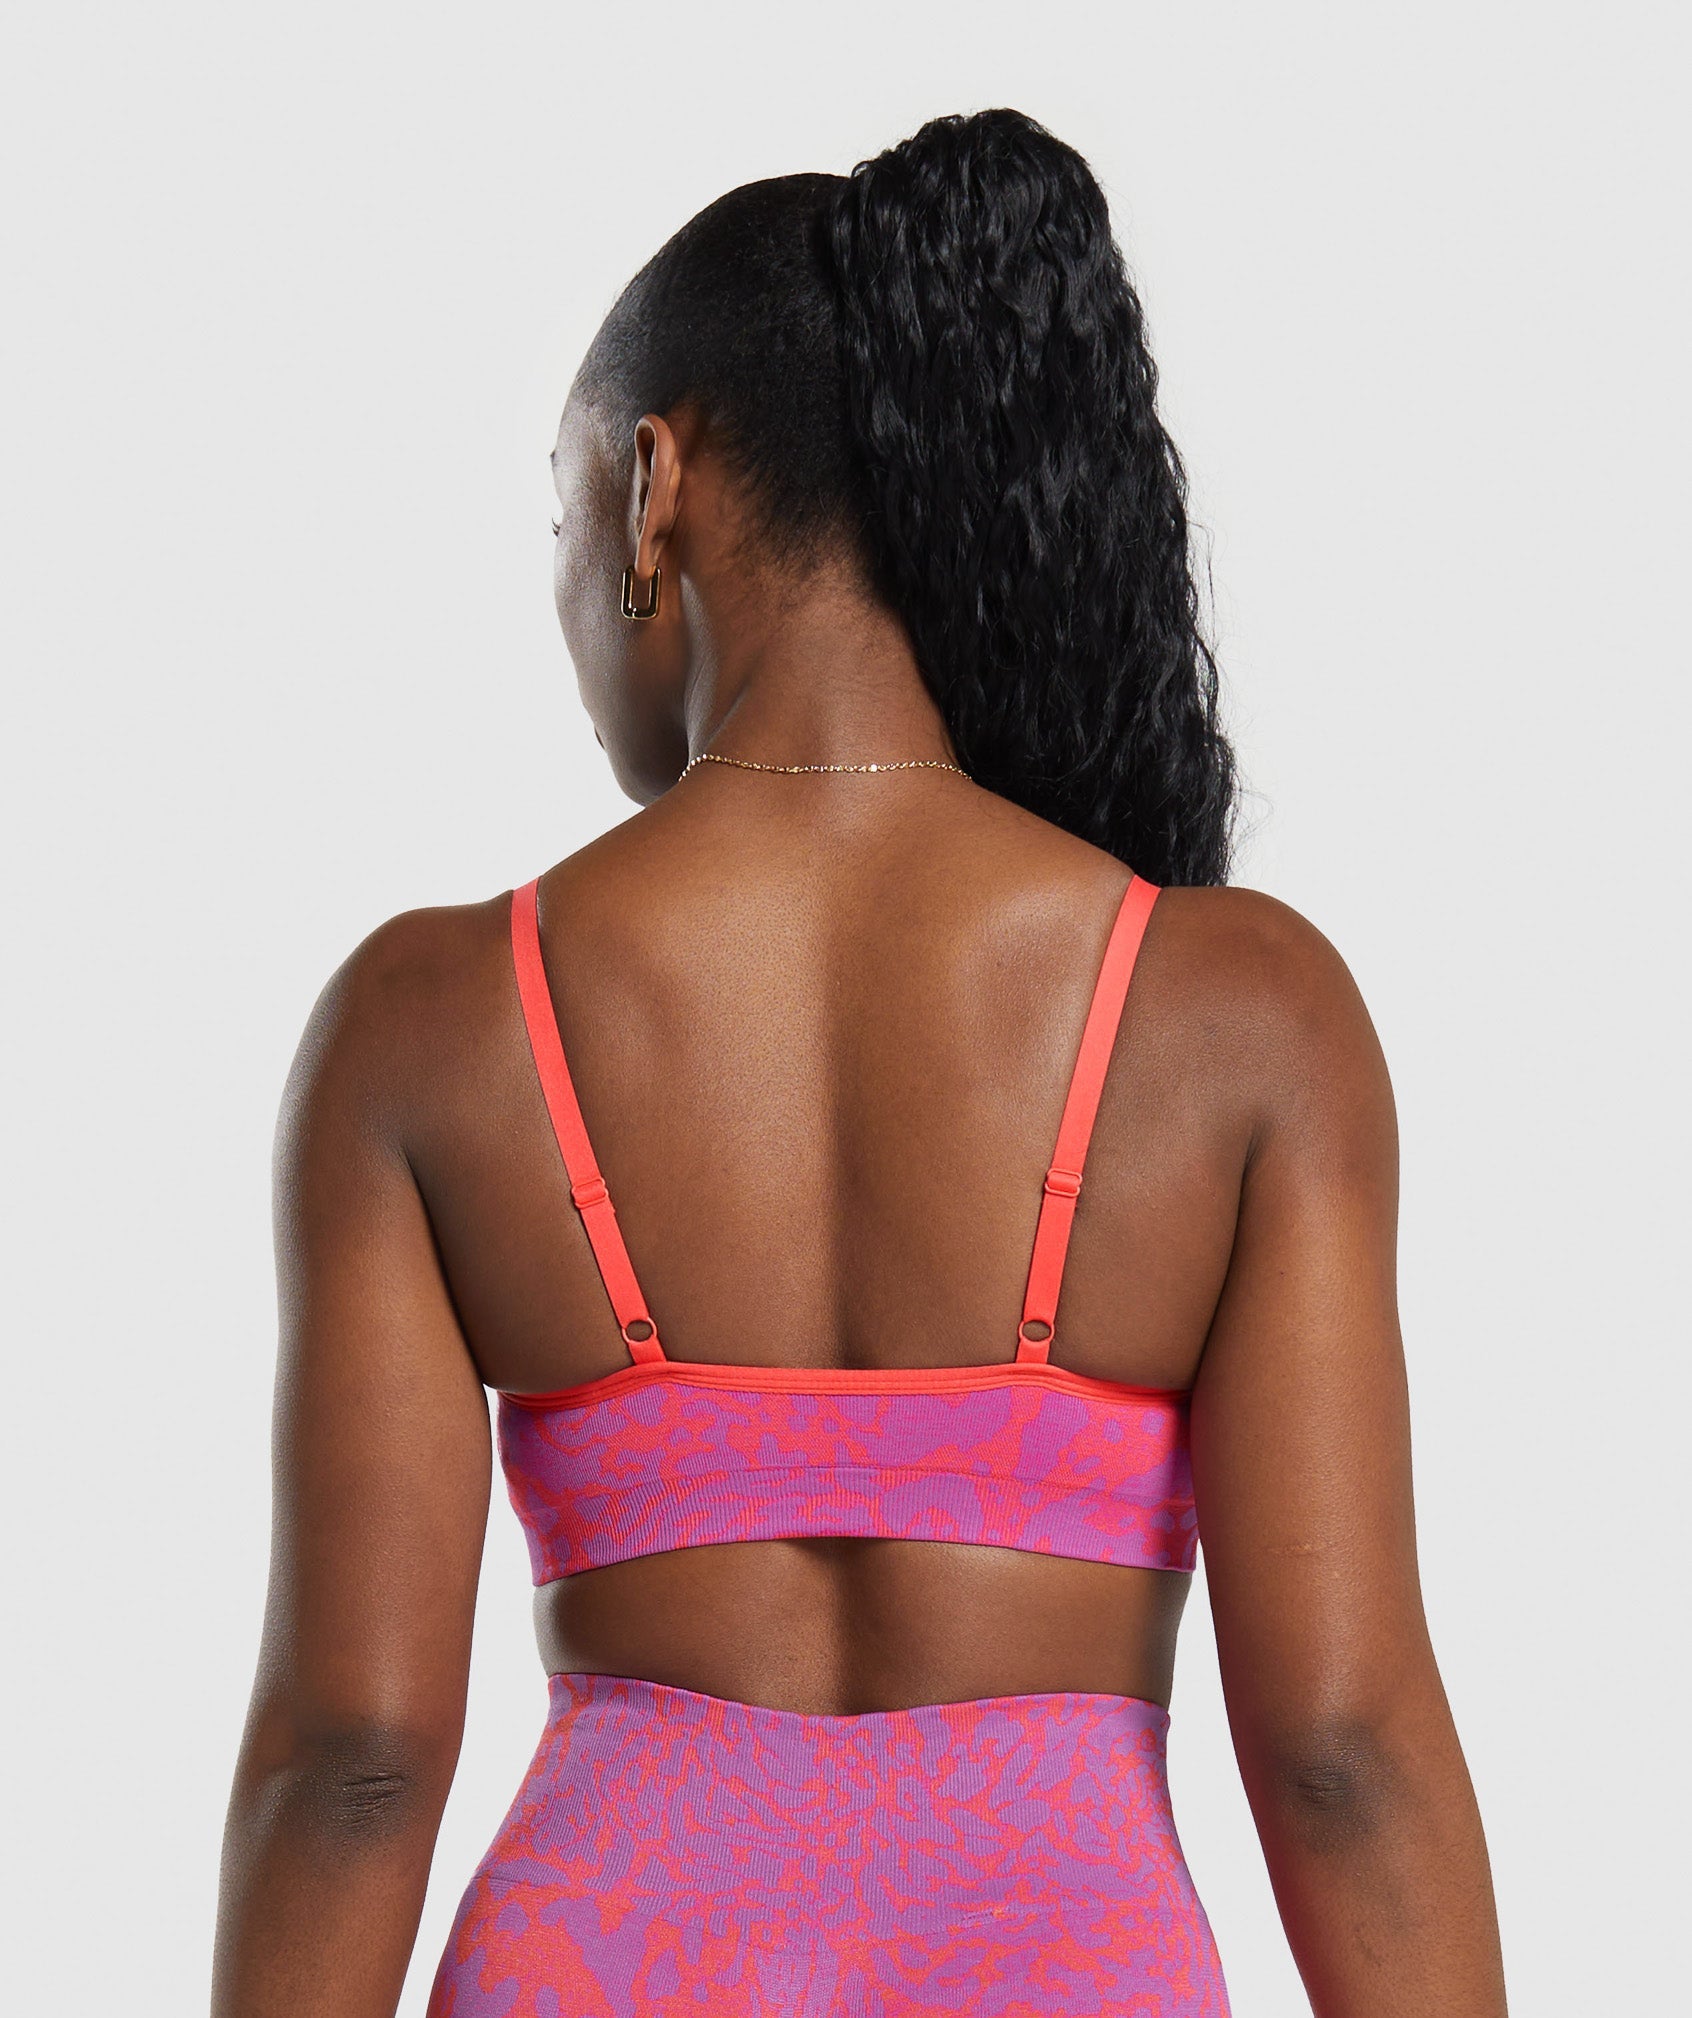 Adapt Safari Seamless Sports Bra in Shelly Pink/Fly Coral - view 2